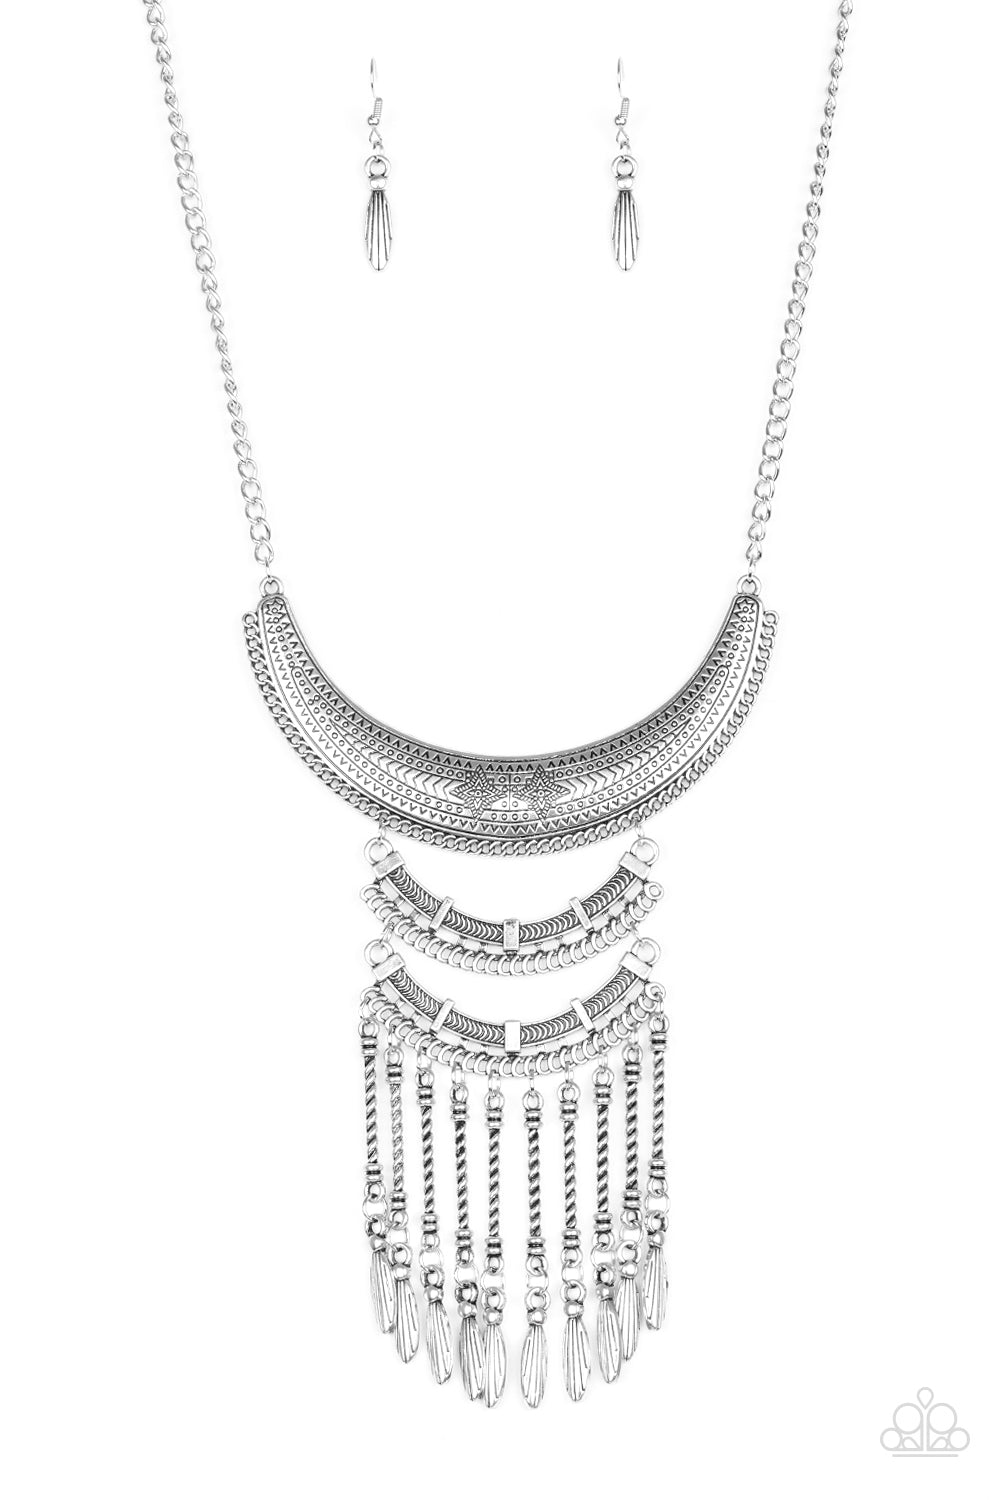 Eastern Empress Silver-Necklace